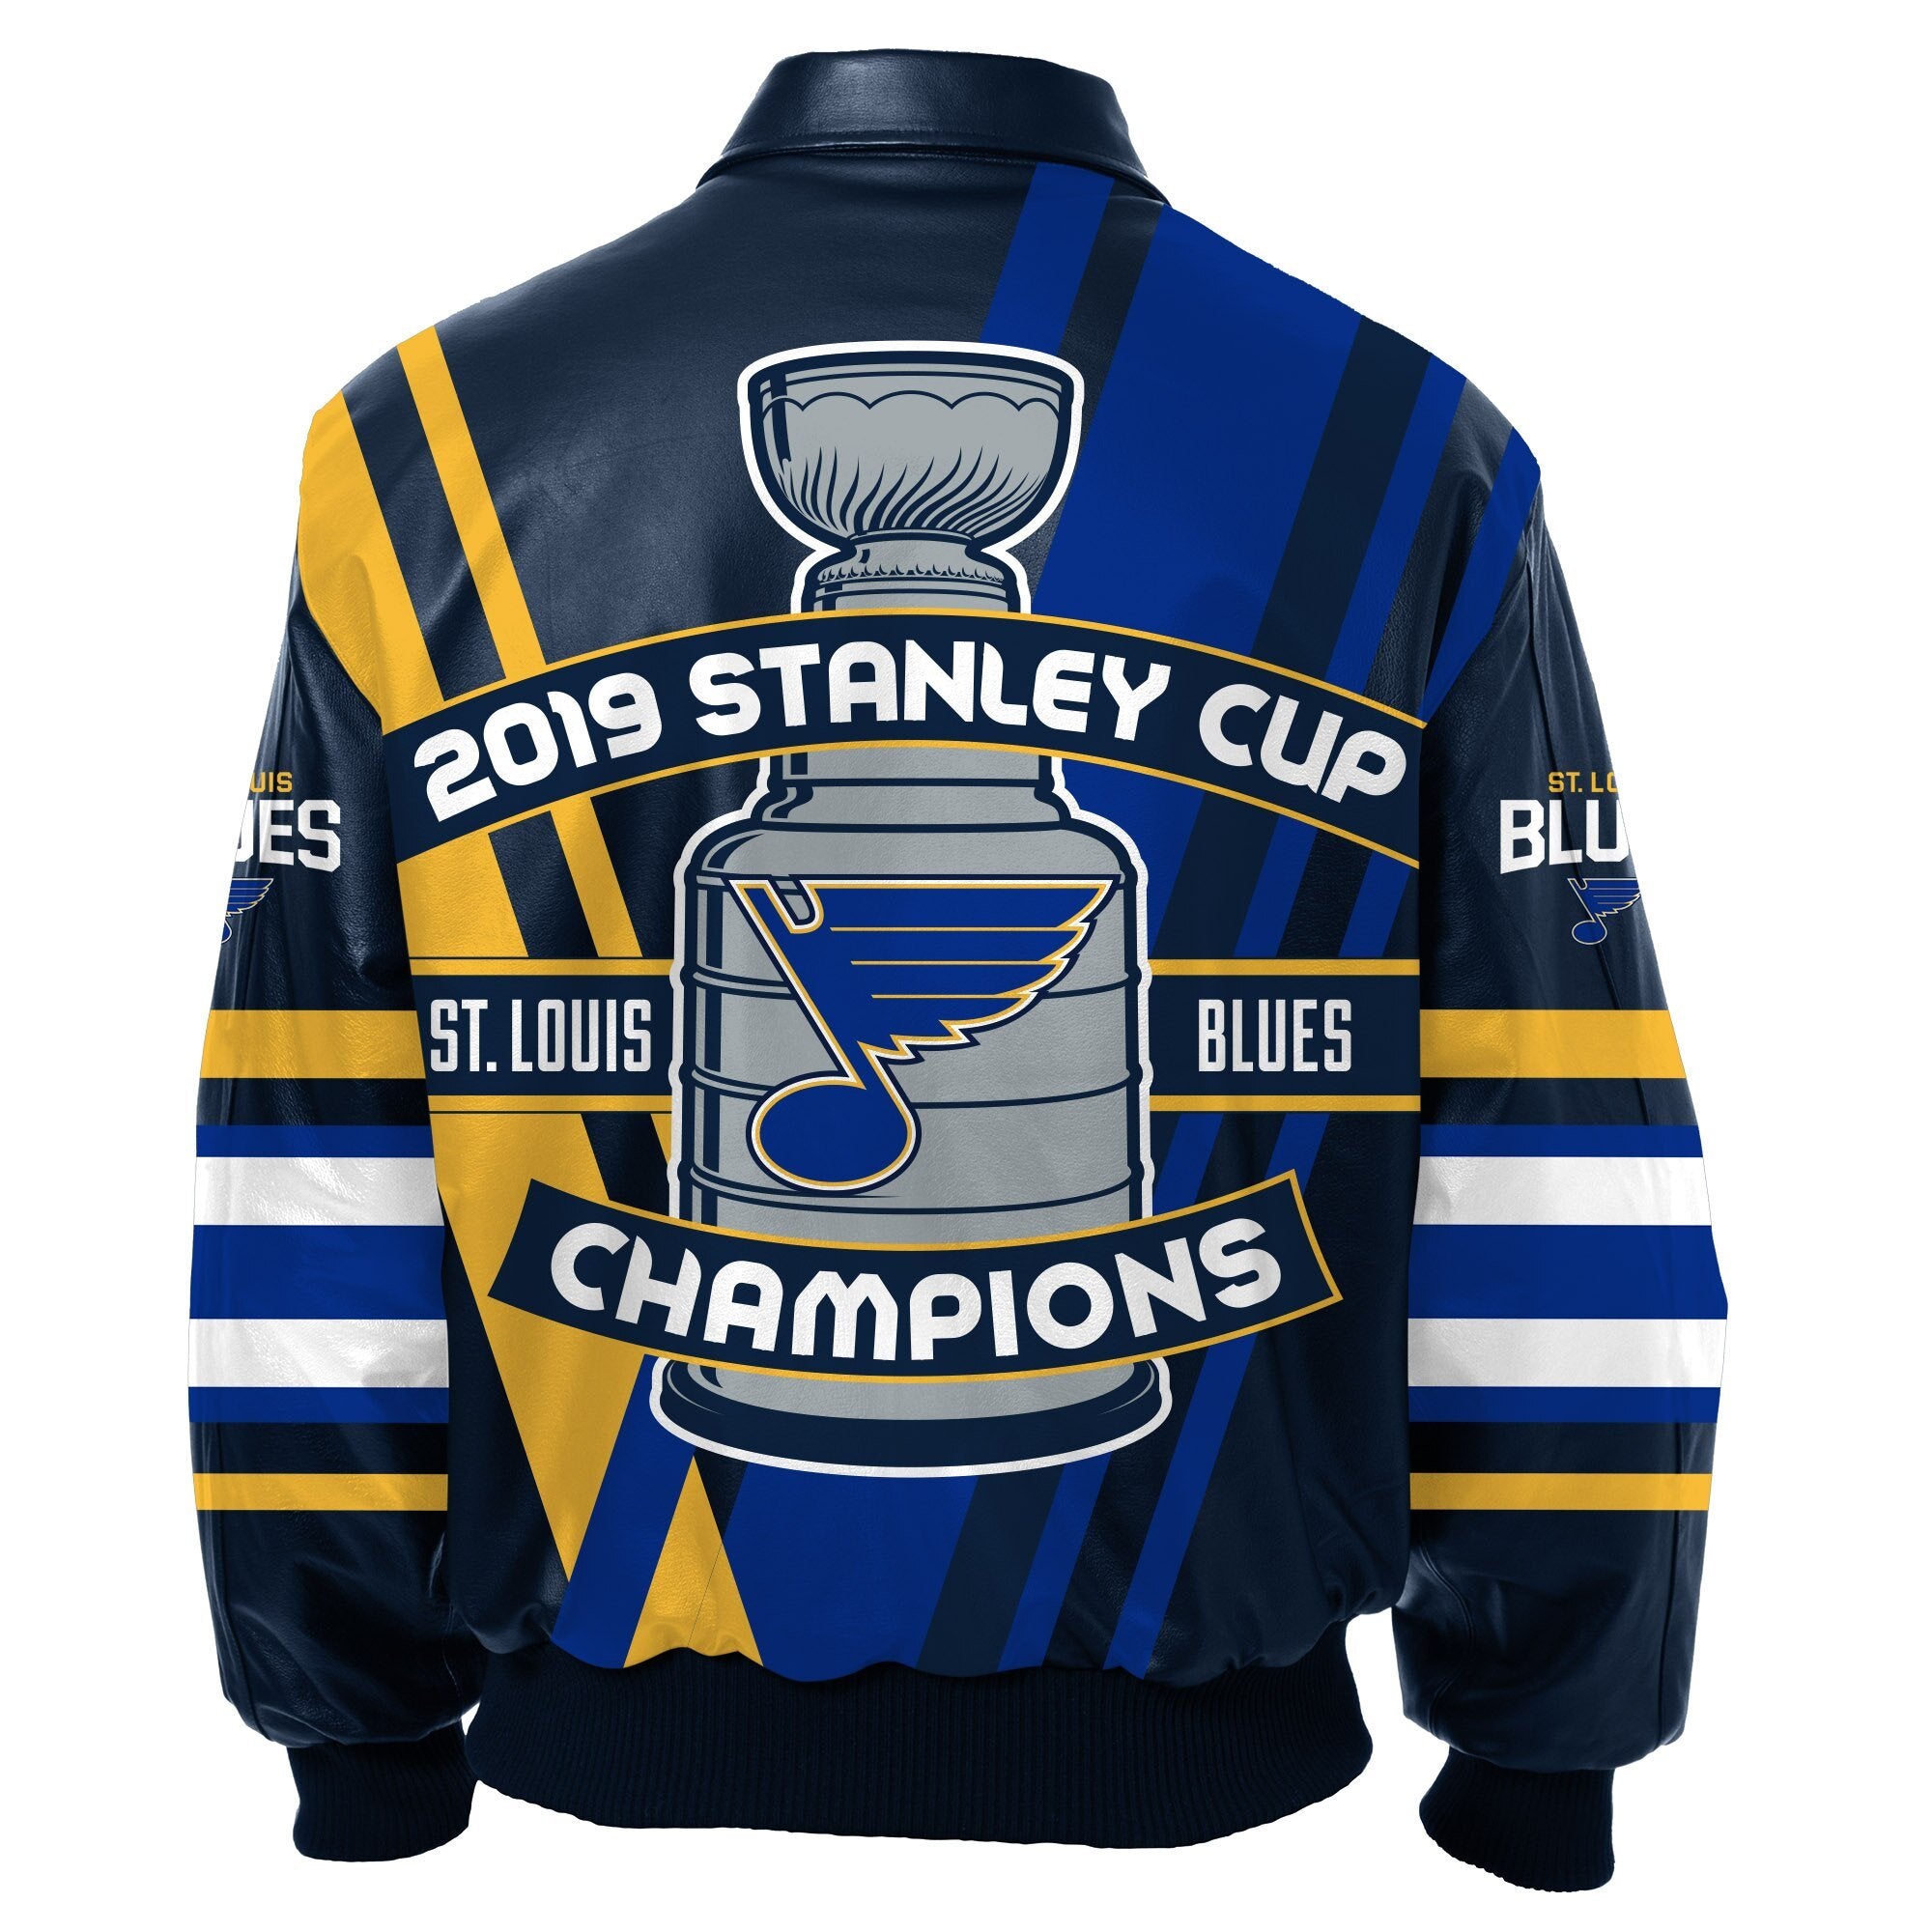 J.H. Sports Jackets St. Louis Blues JH Design 2019 Stanley Cup Champions Lambskin Leather Jacket - Navy 4X-Large